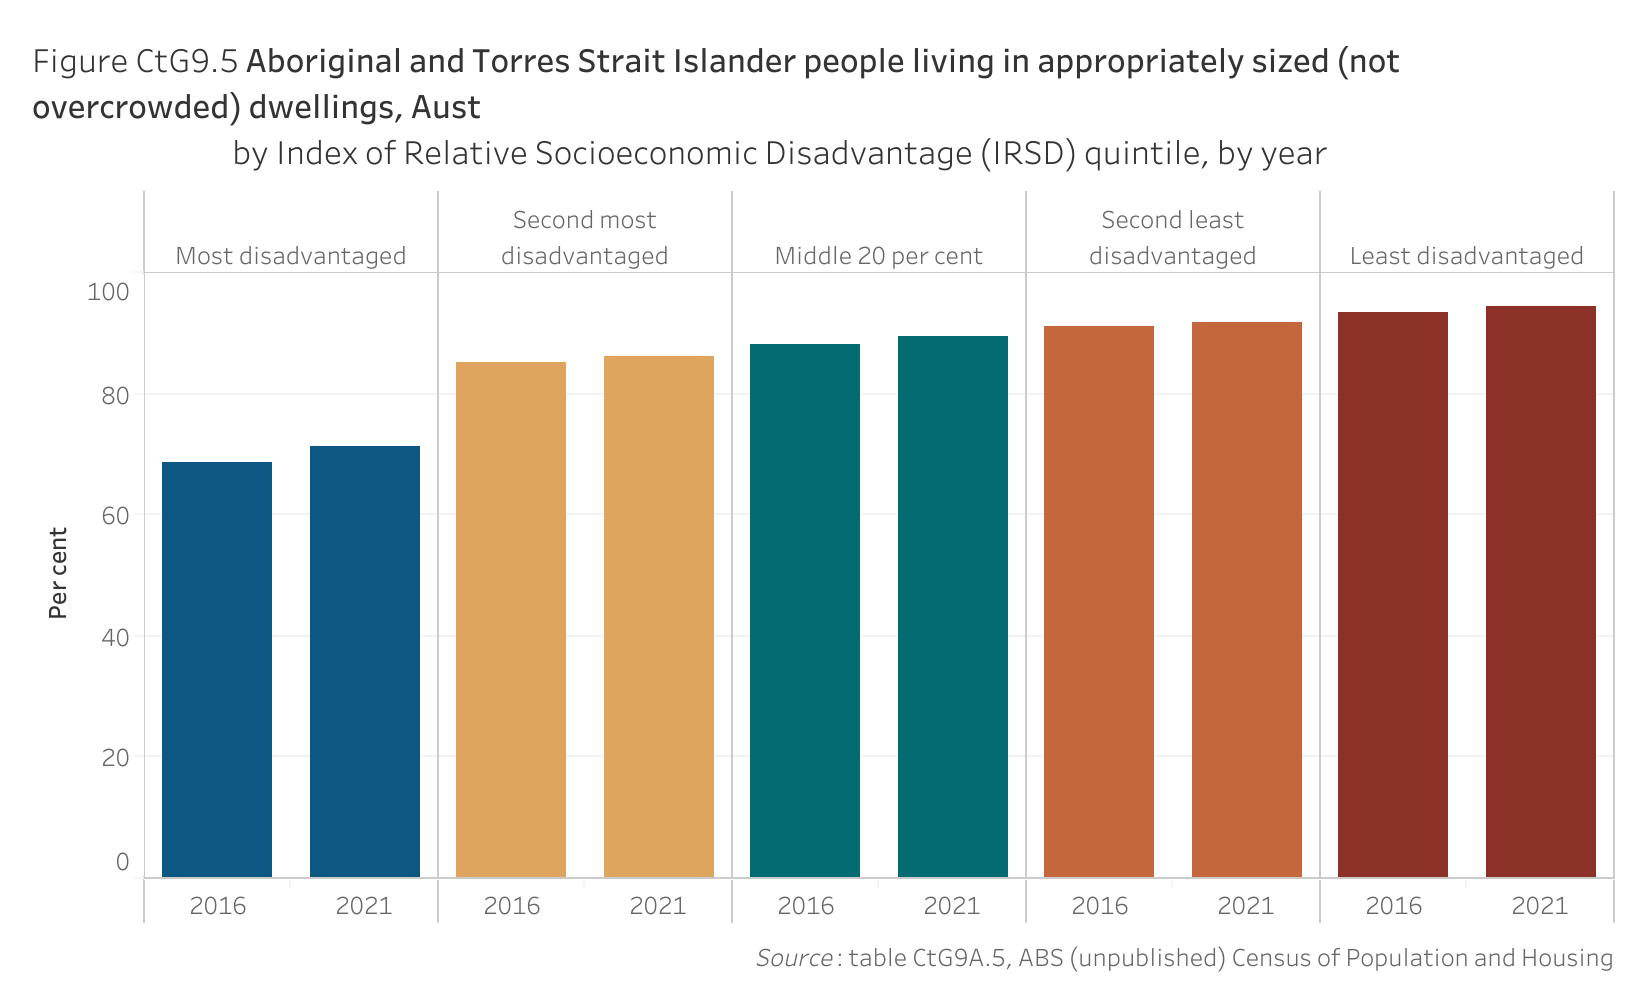 Figure CtG9.5 shows Aboriginal and Torres Strait Islander people living in appropriately sized (not overcrowded) dwellings, Australia, by Index of Relative Socioeconomic Disadvantage quintile, by year. More details can be found within the text near this image.